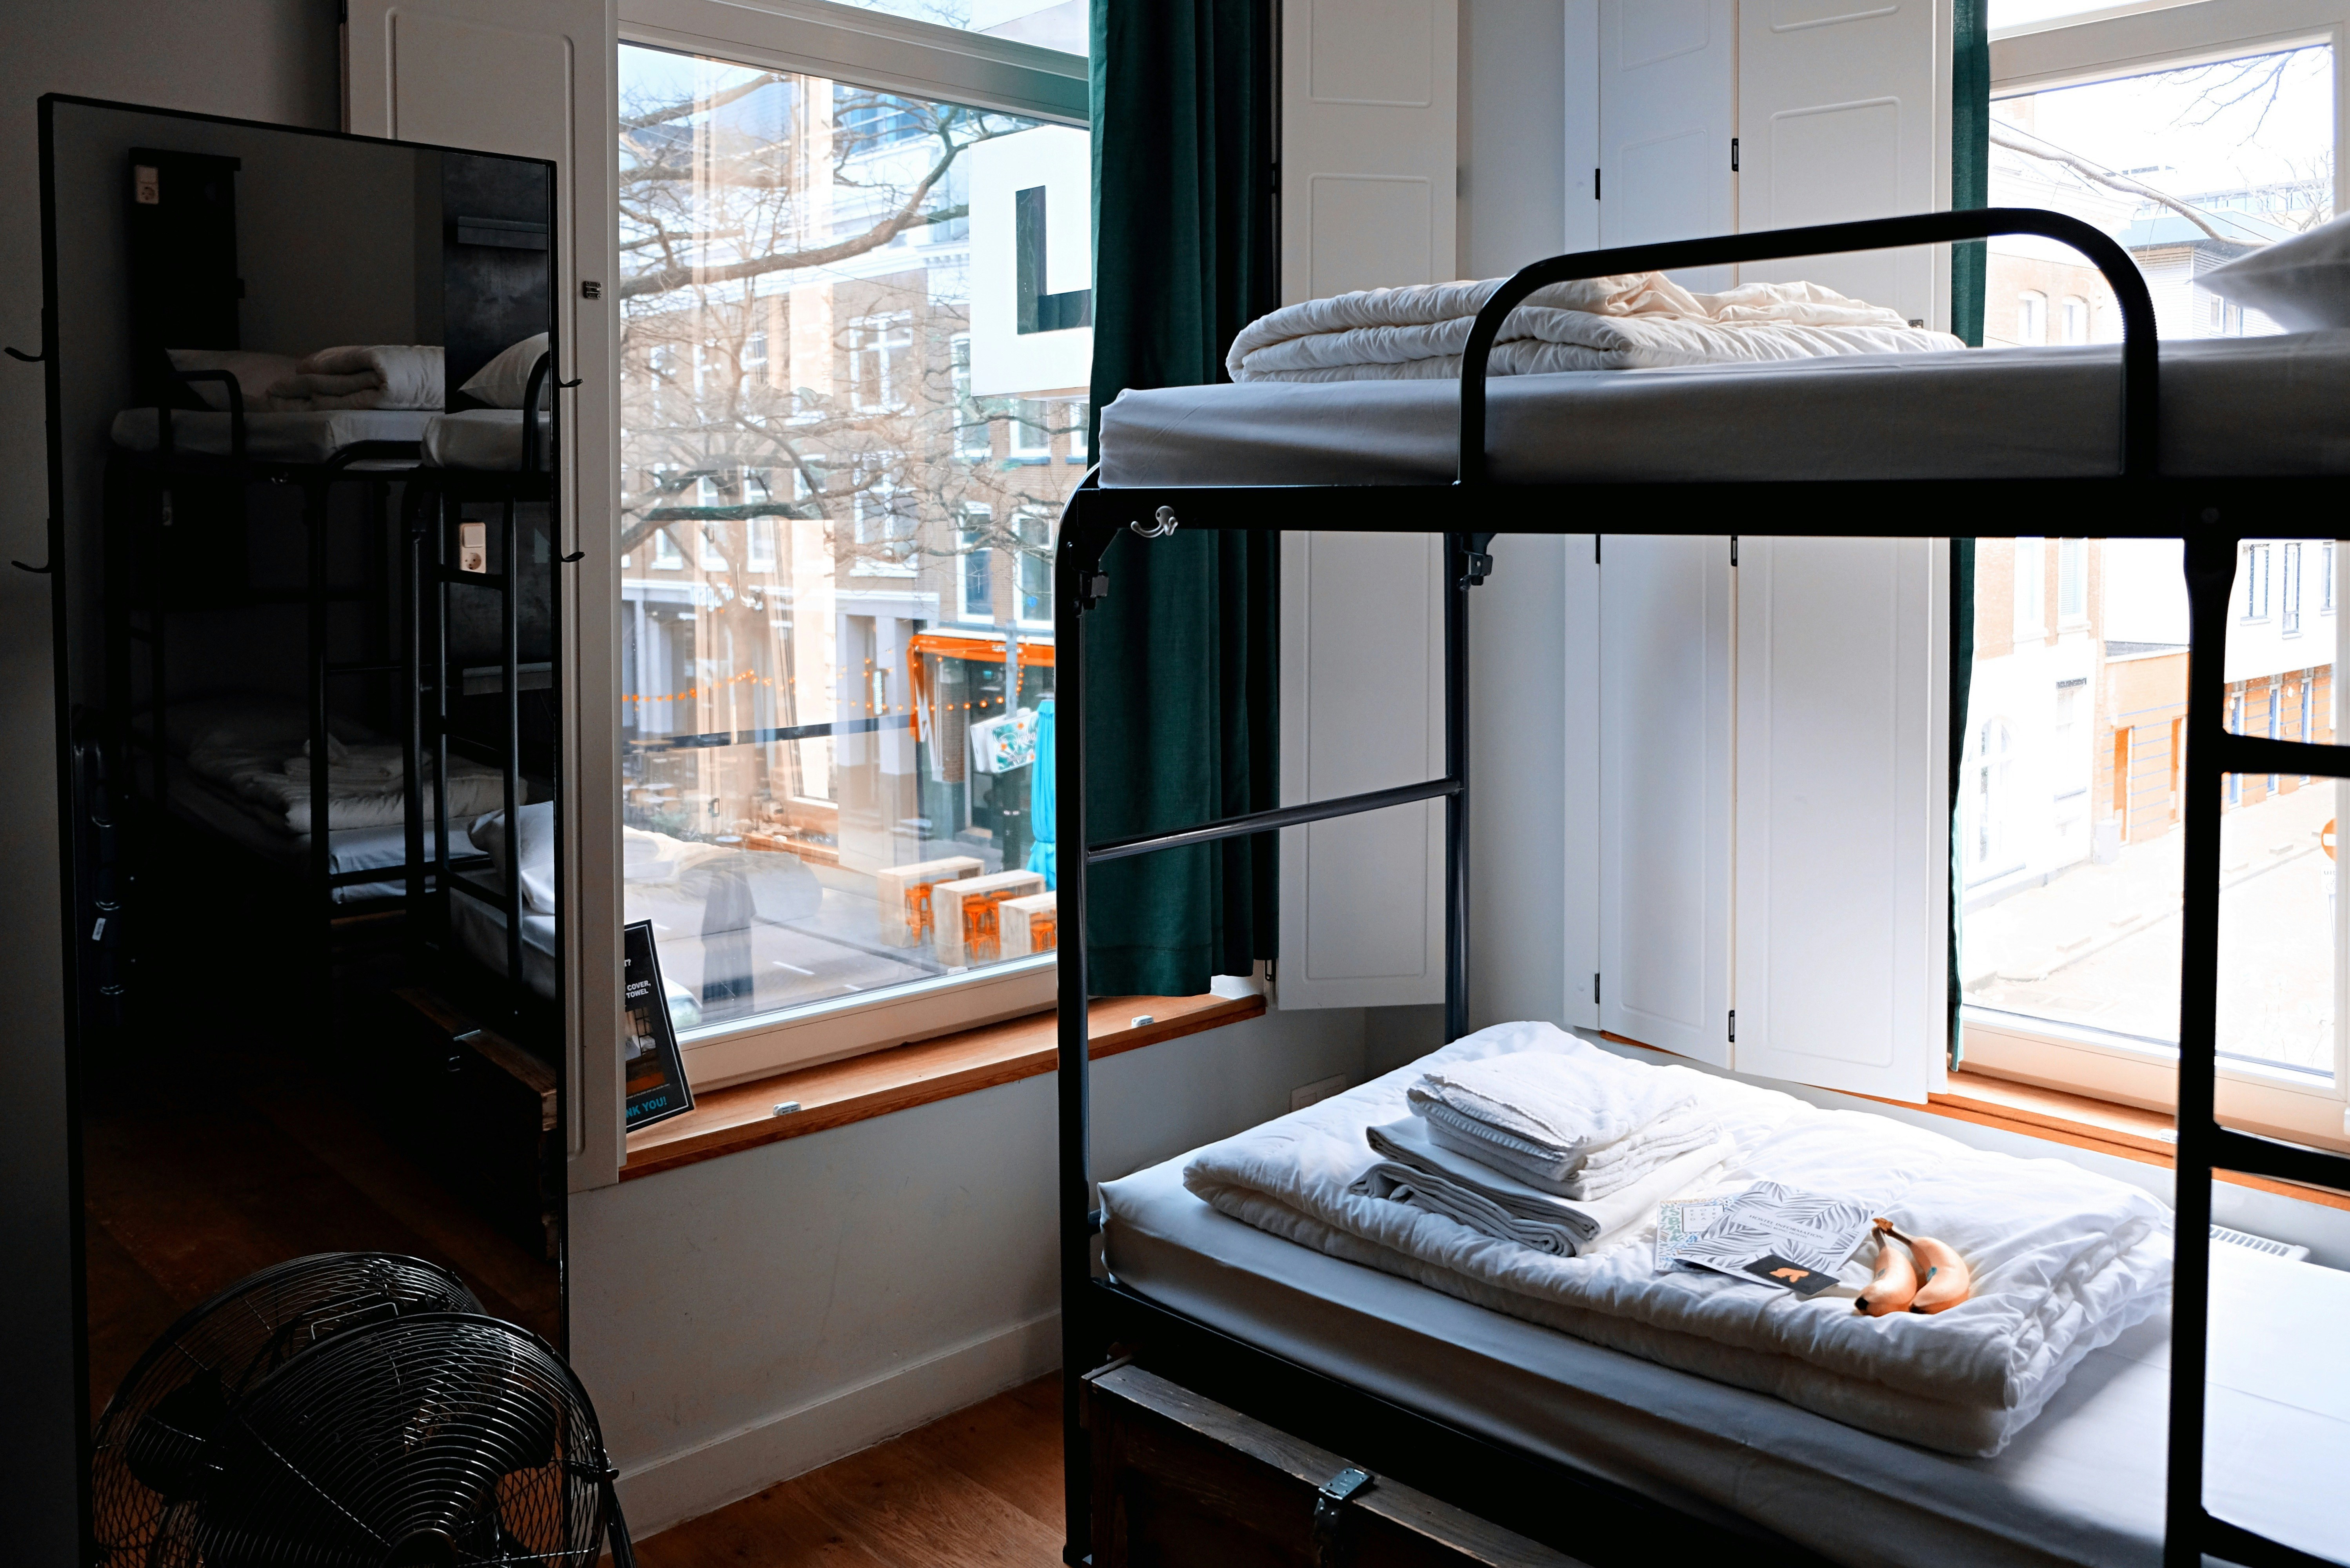 A bunk bed with clean folded linens is seen in this hostel room, with windows looking over a city.